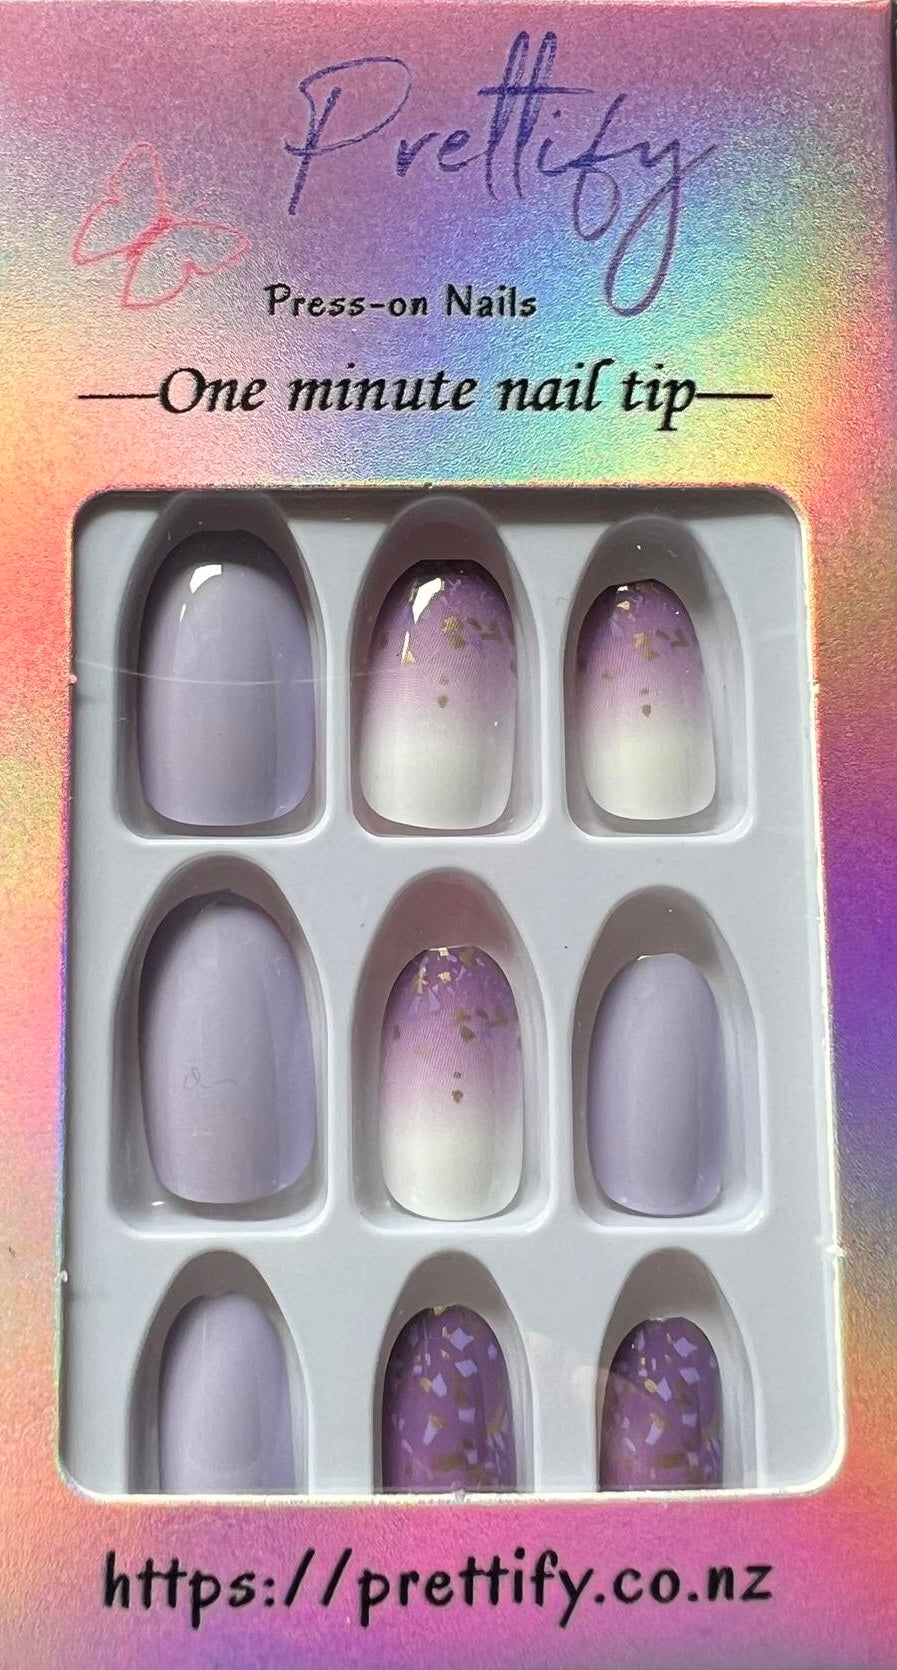 Oval Press on Nails. Lilac & White with Glitter. Durable Acrylic Press on Nails. Easy and quick to apply. Great for those special occasions, parties or add an edge to any outfit. Gorgeous, flattering and you can re-use them again and again.